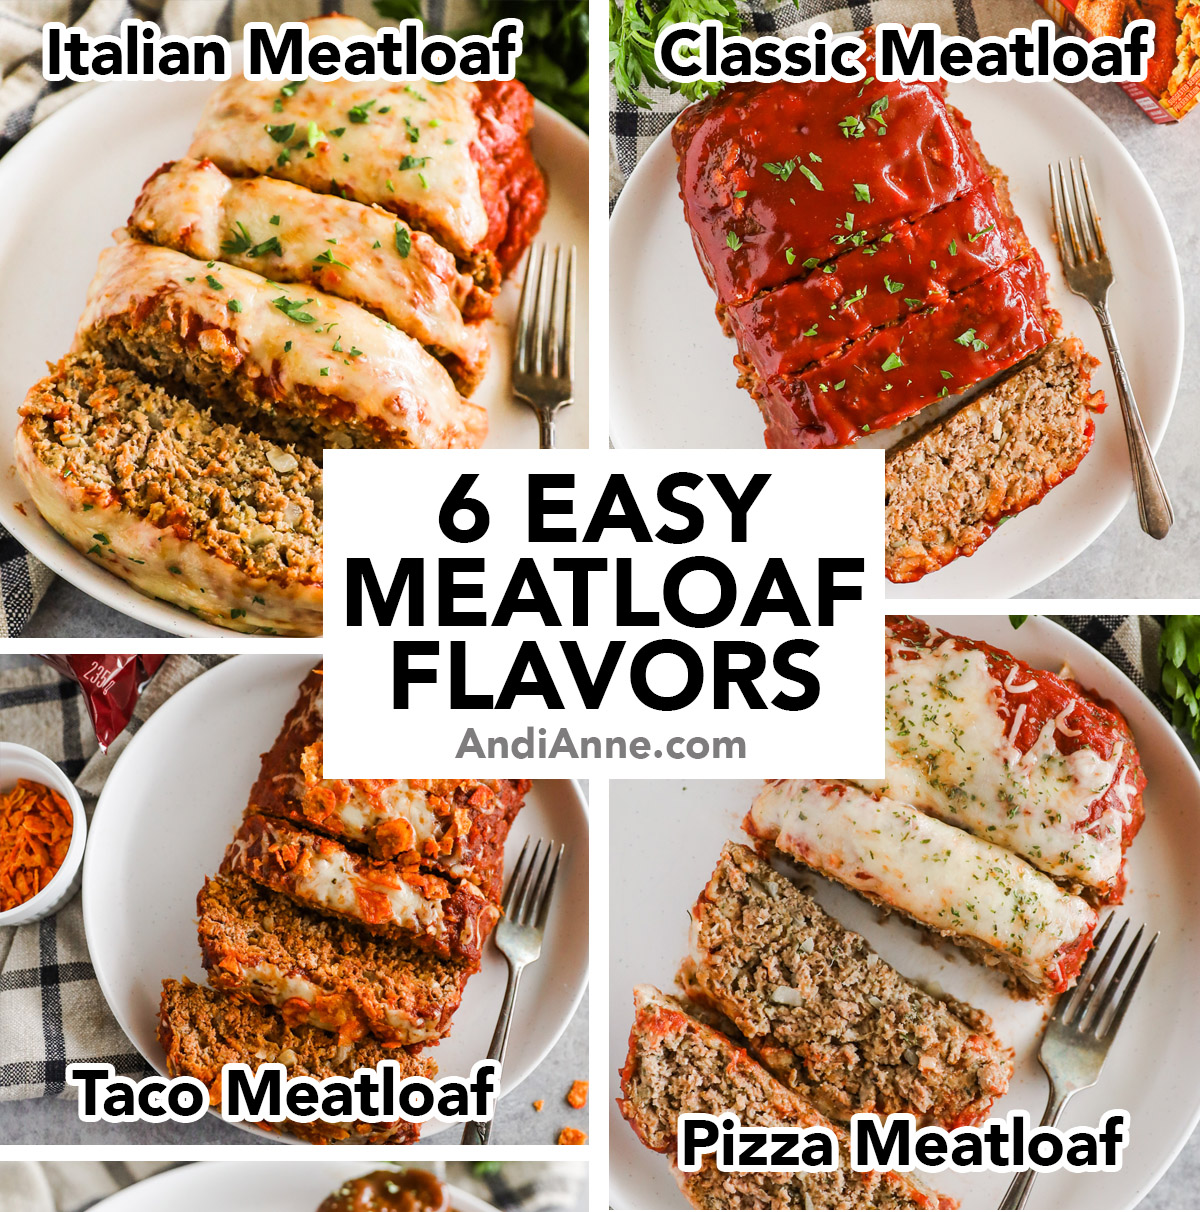 Image with six meatloaf flavor recipes including italian, classic, taco, pizza, brown gravy and stuffing.